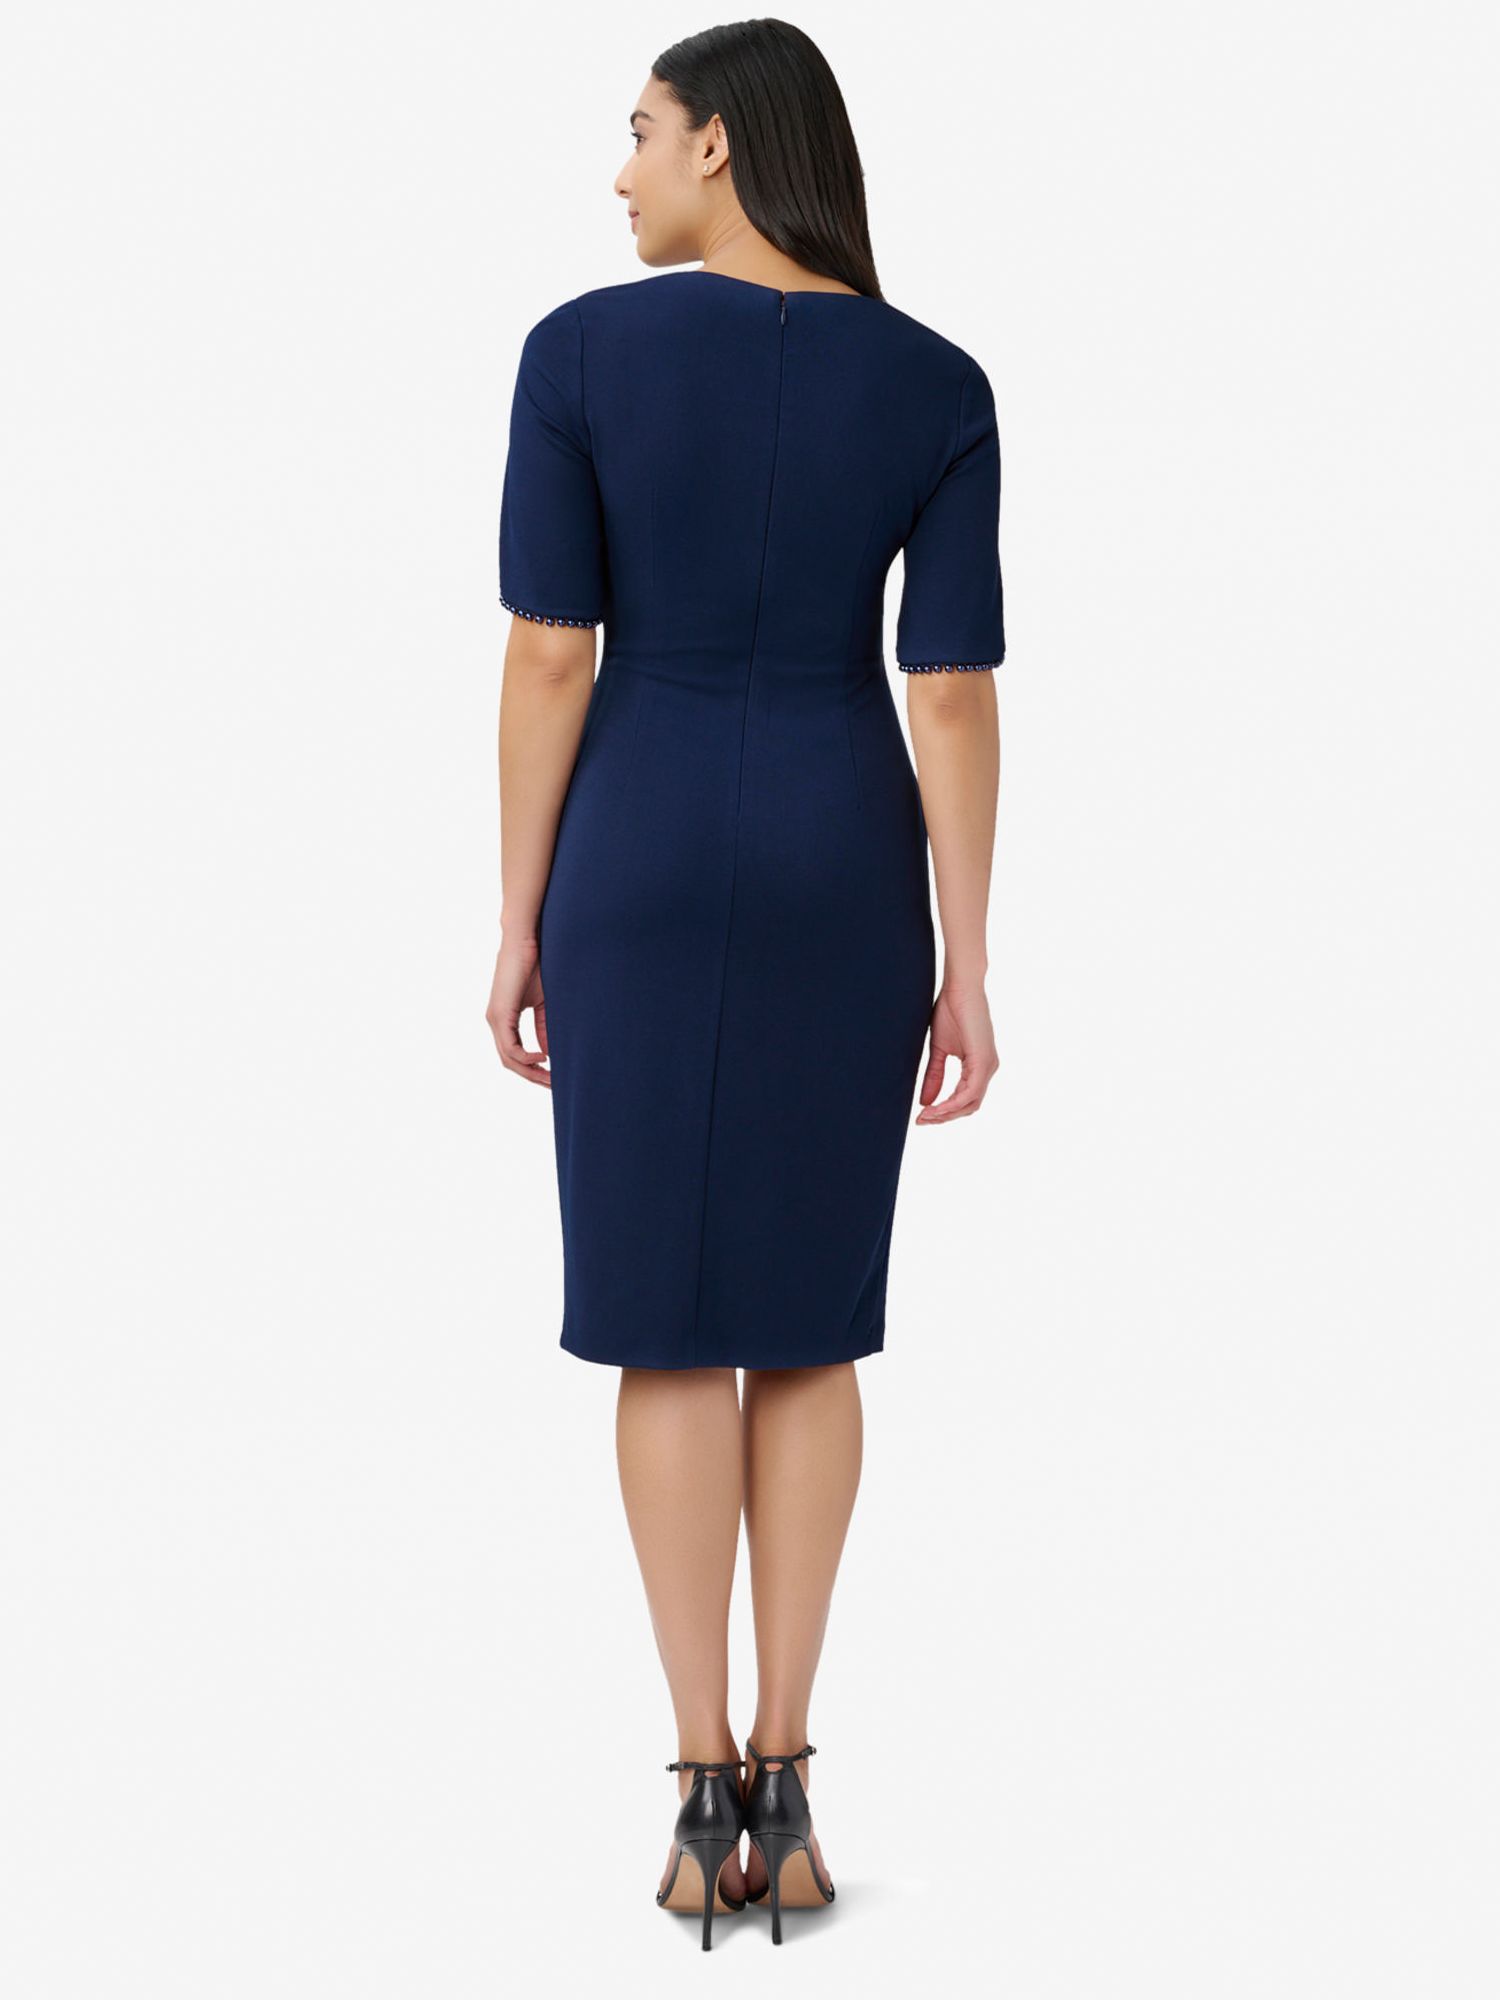 Buy Adrianna Papell Knit Crepe Pearl Trim Knee Length Dress Online at johnlewis.com